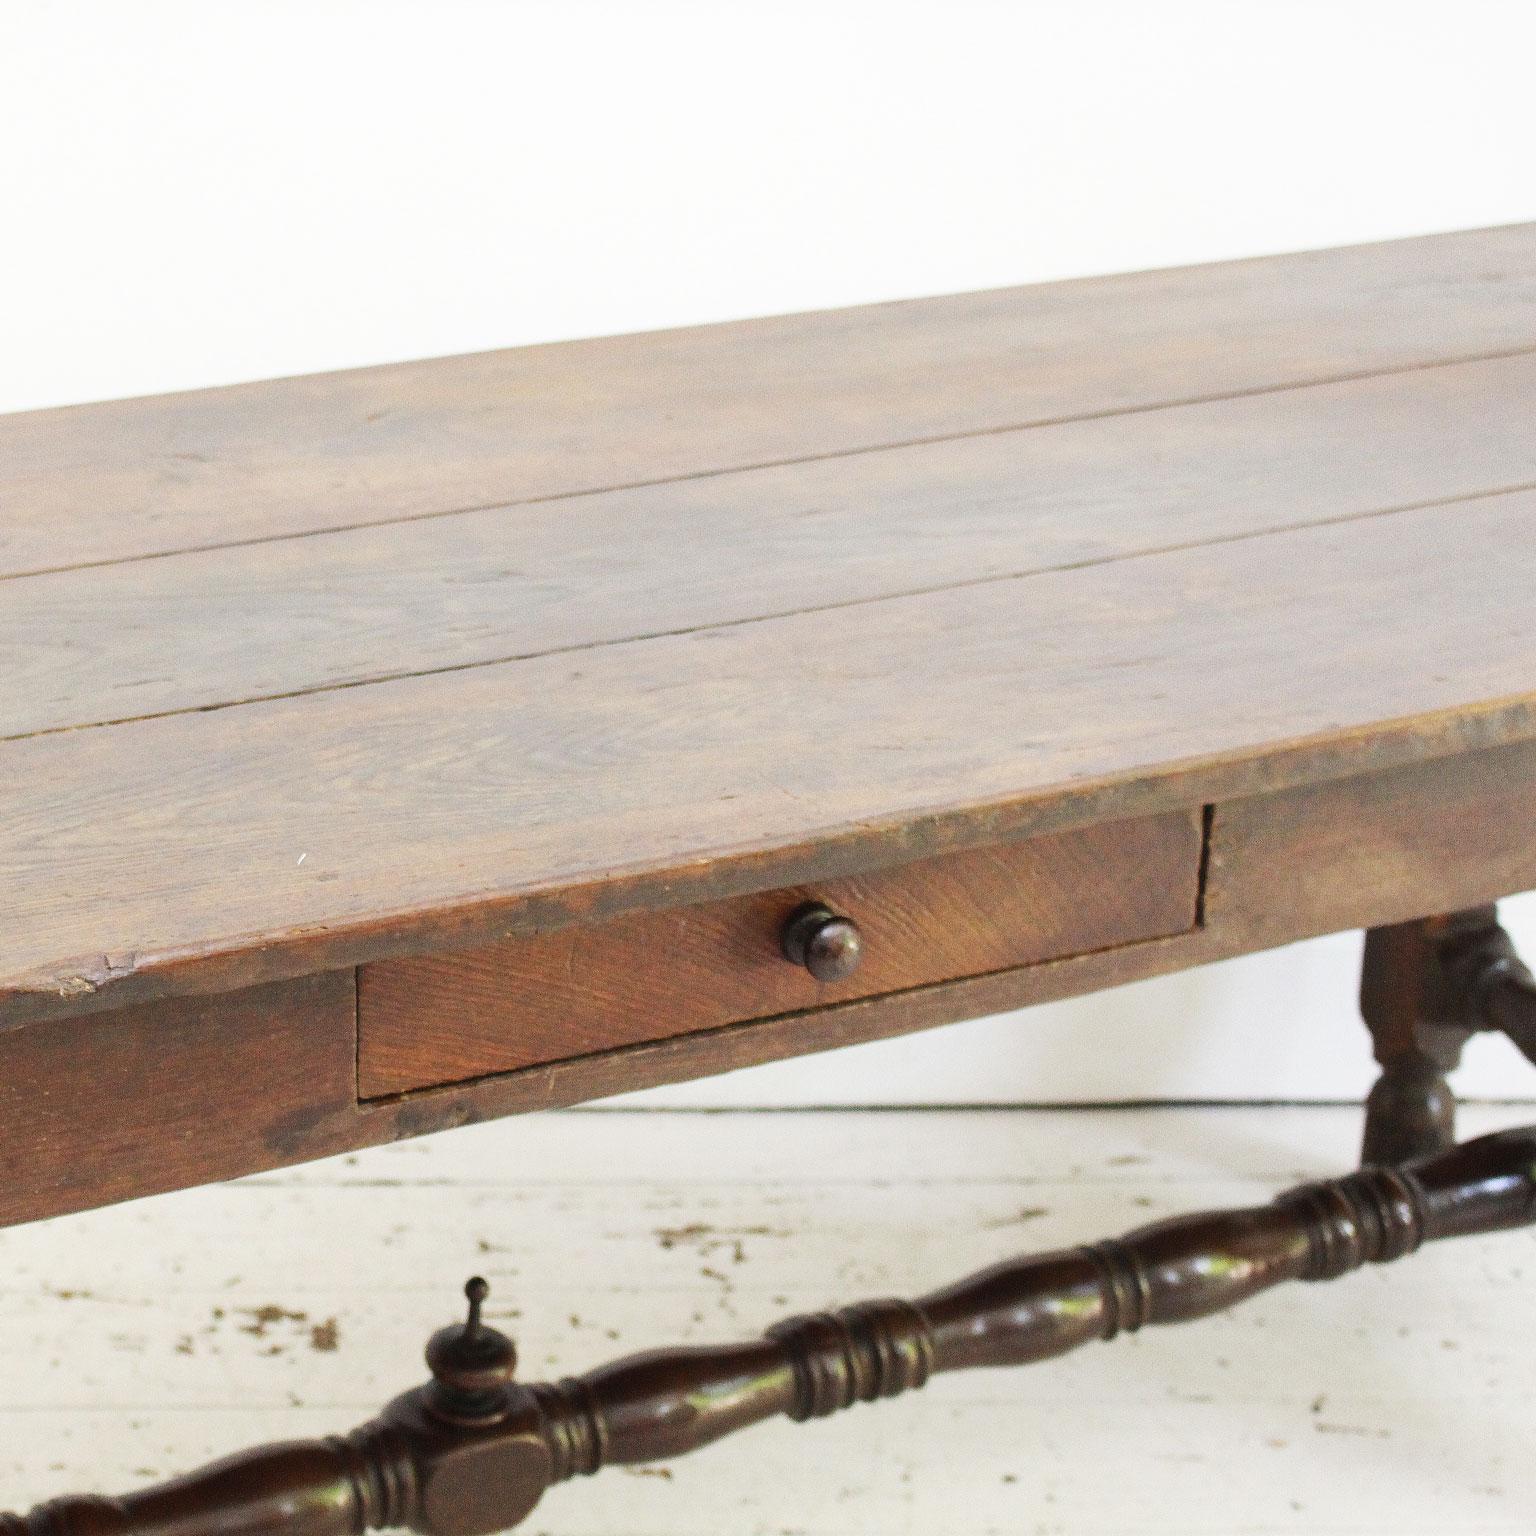 This very attractive antique 18th century oak refectory dining table has turned legs, a three plank top and comfortably seats 8 - 10 people. Excellent color and patination. The centre stretcher is also turned and is adorned with an unusual carved